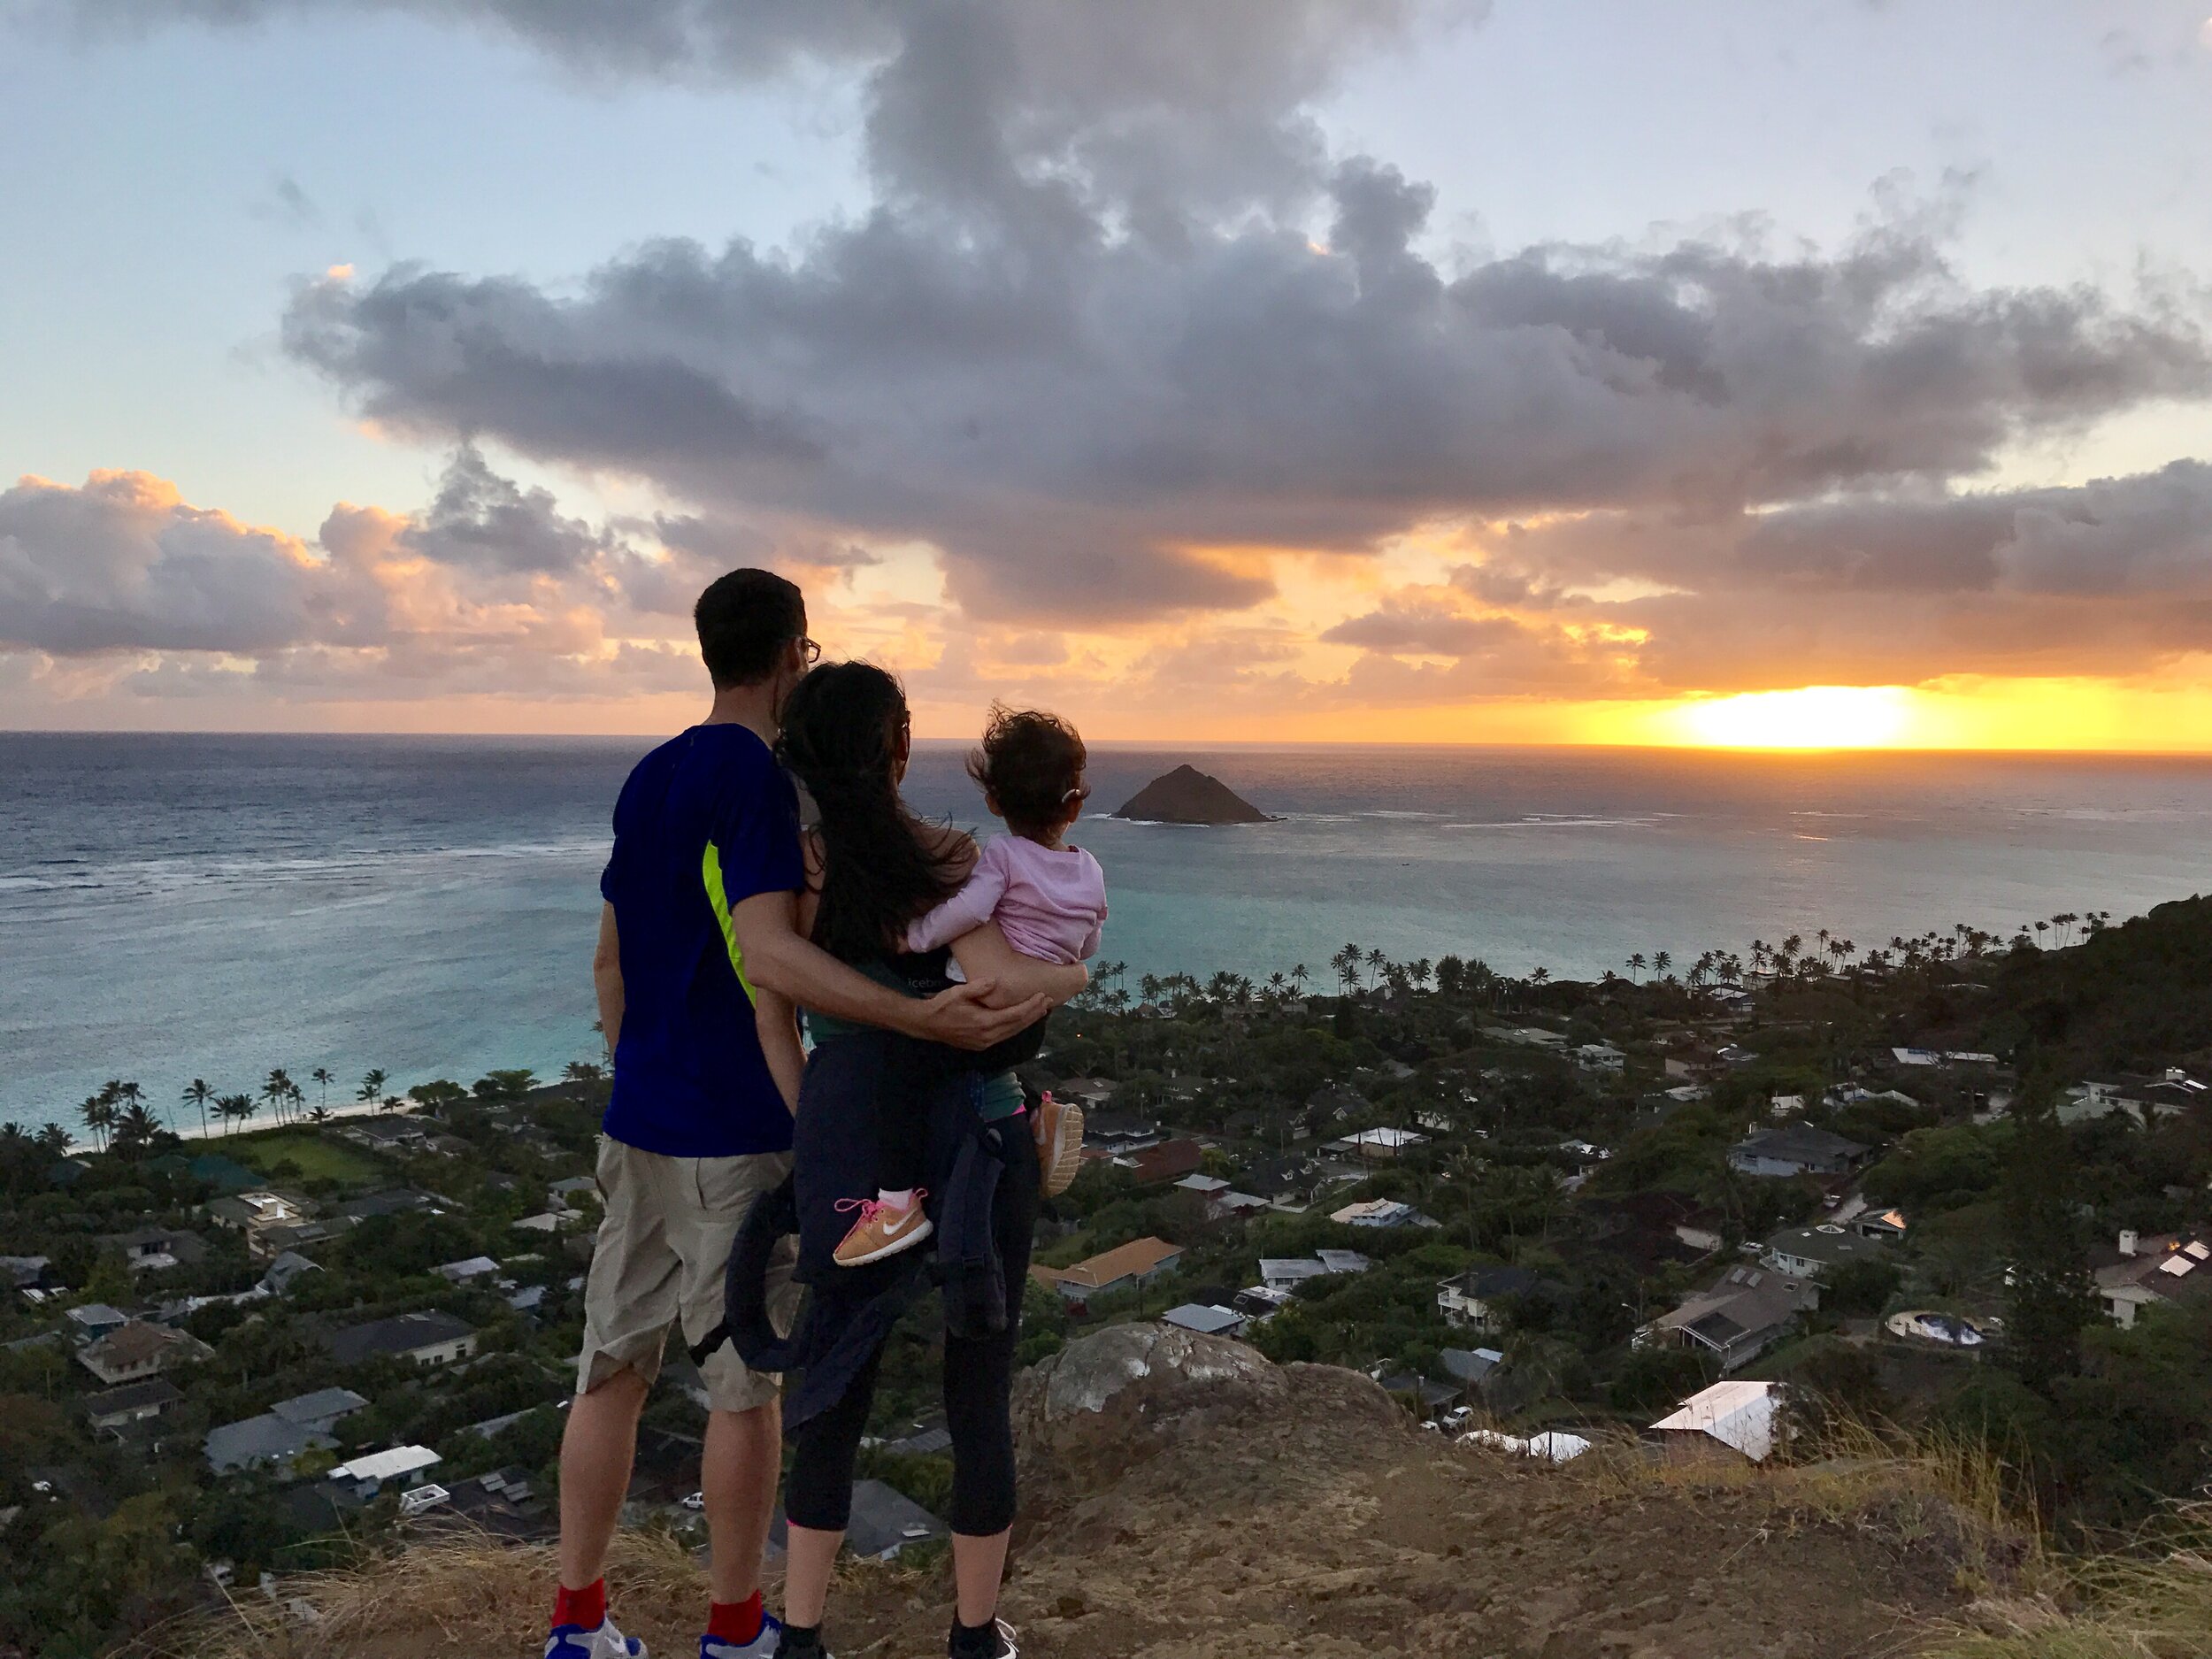 Oahu is the perfect winter destination for young families, find out where to play, stay and eat gluten free. Visit shortsweetmom.com for awesome travel tips. 